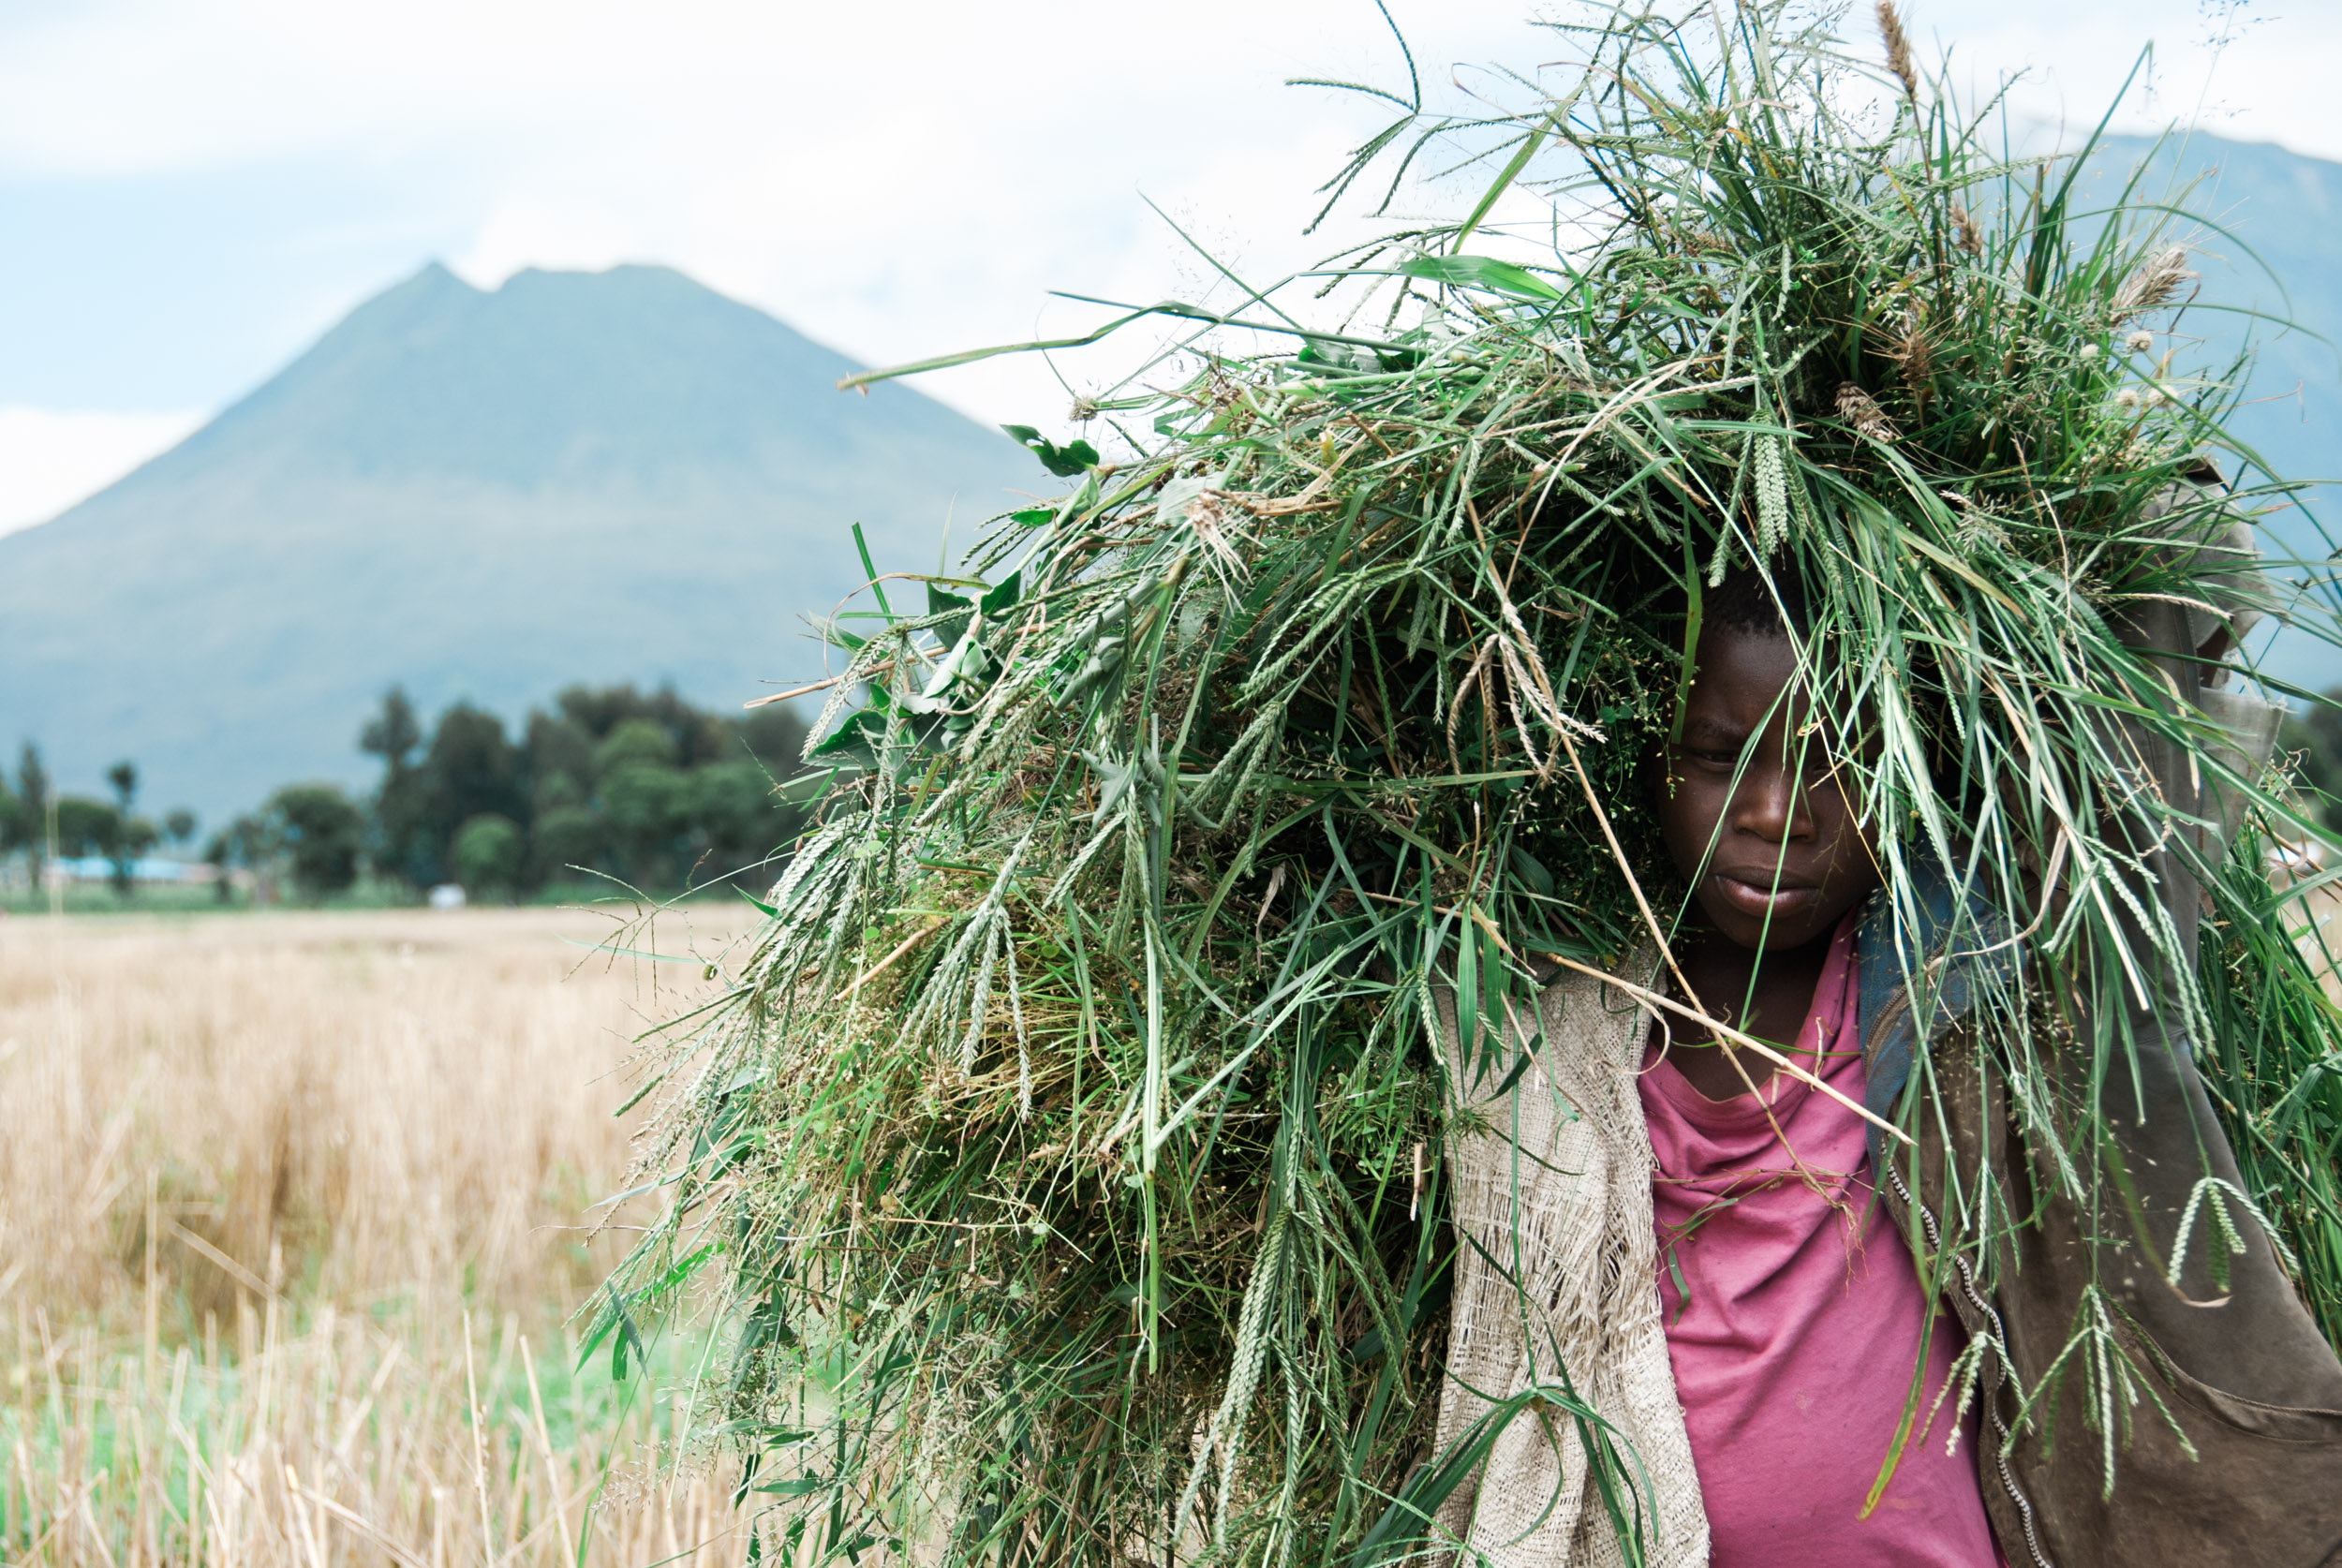  A boy carries grass for his family's thatched hut in the farmlands below the Virunga volcanoes. 